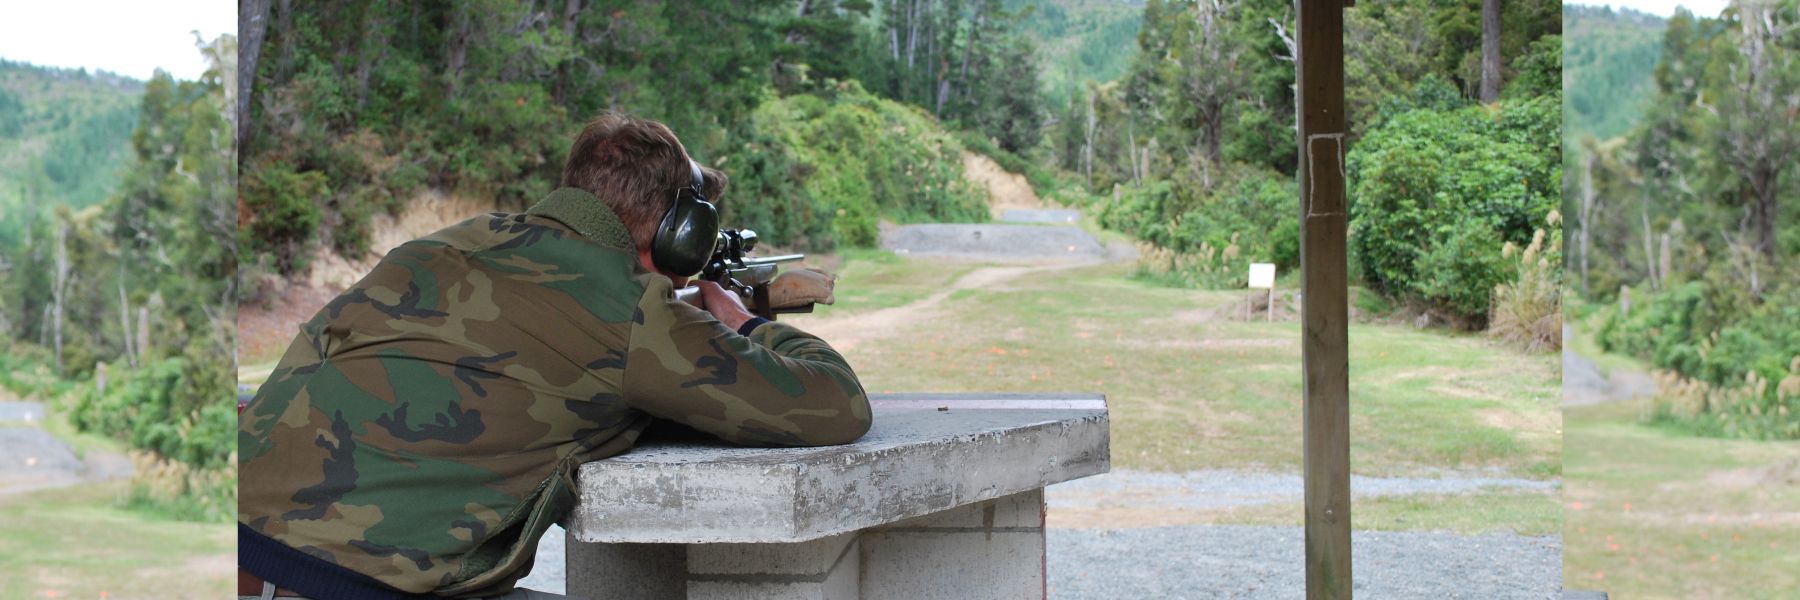 Big Changes Coming For Rifle Ranges